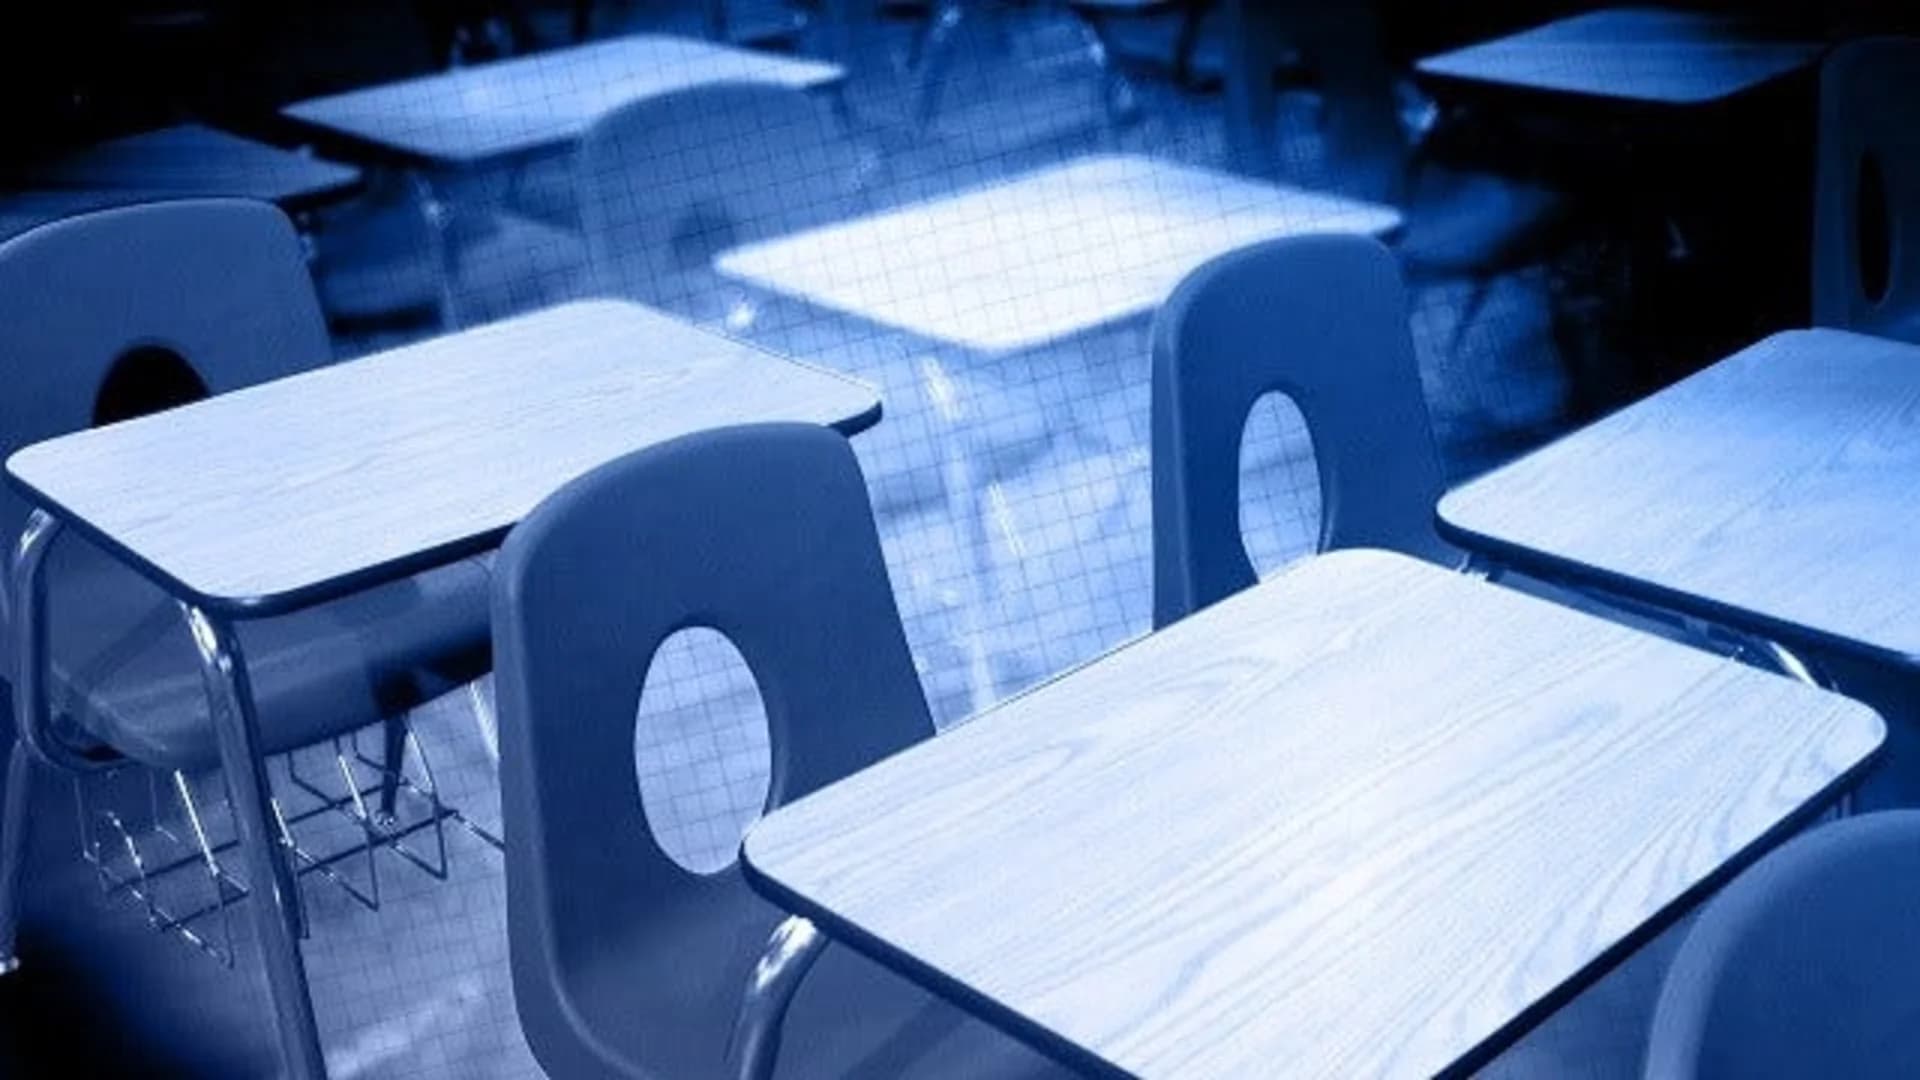 Officials: Threats made against several NJ schools Friday ‘not credible’